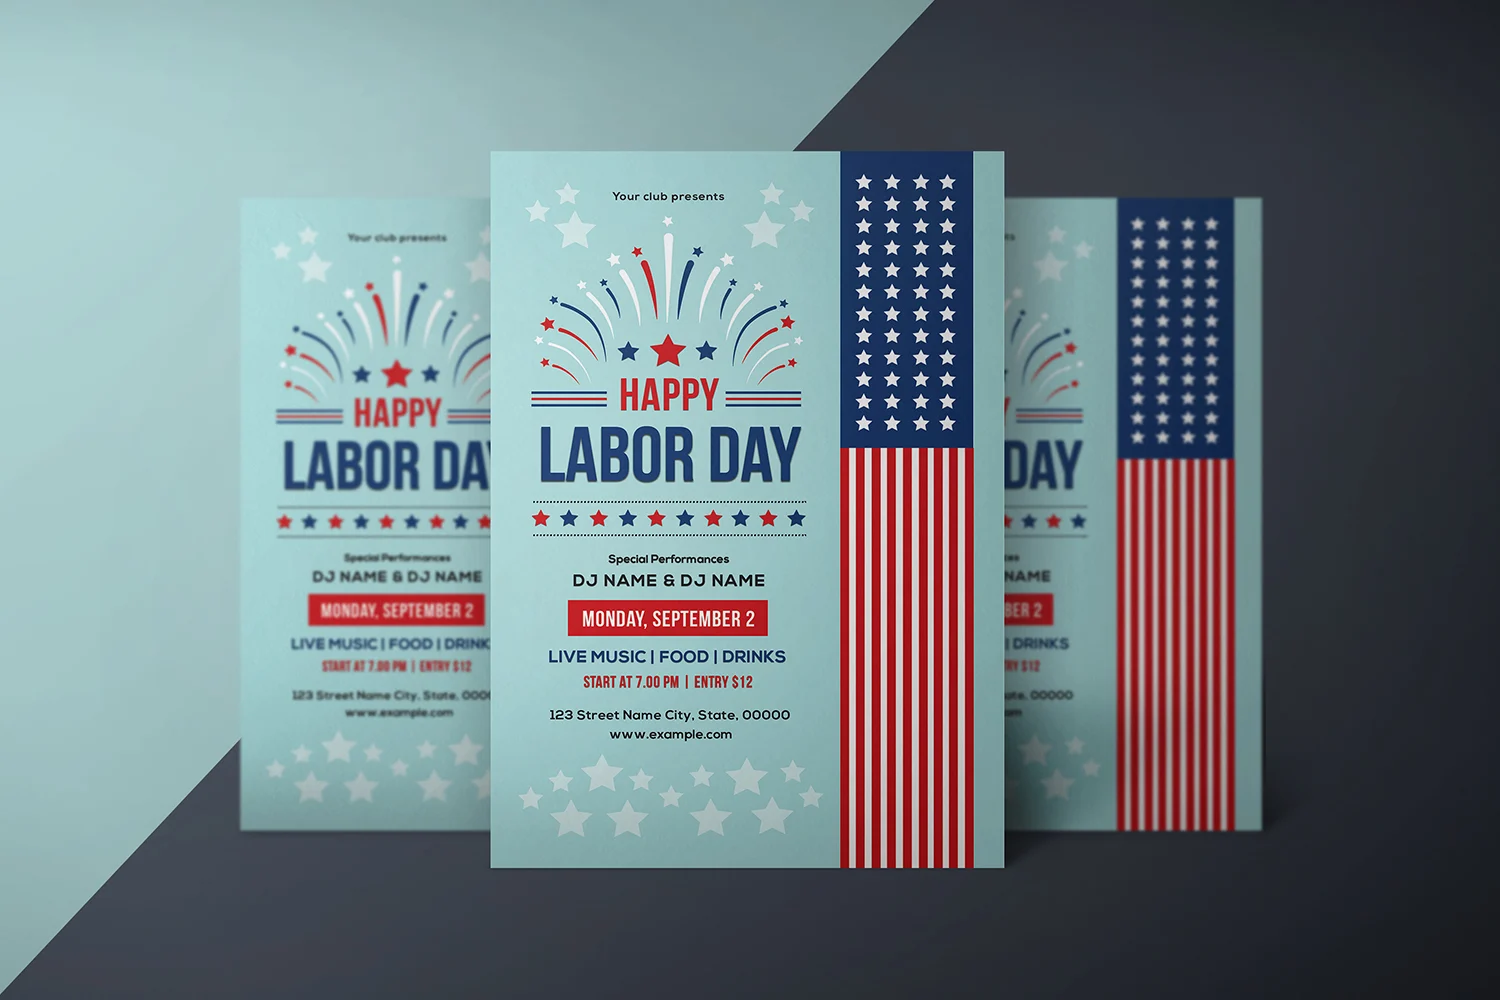 3 mockups of USA labor day flyers on a blue and dark gray background.